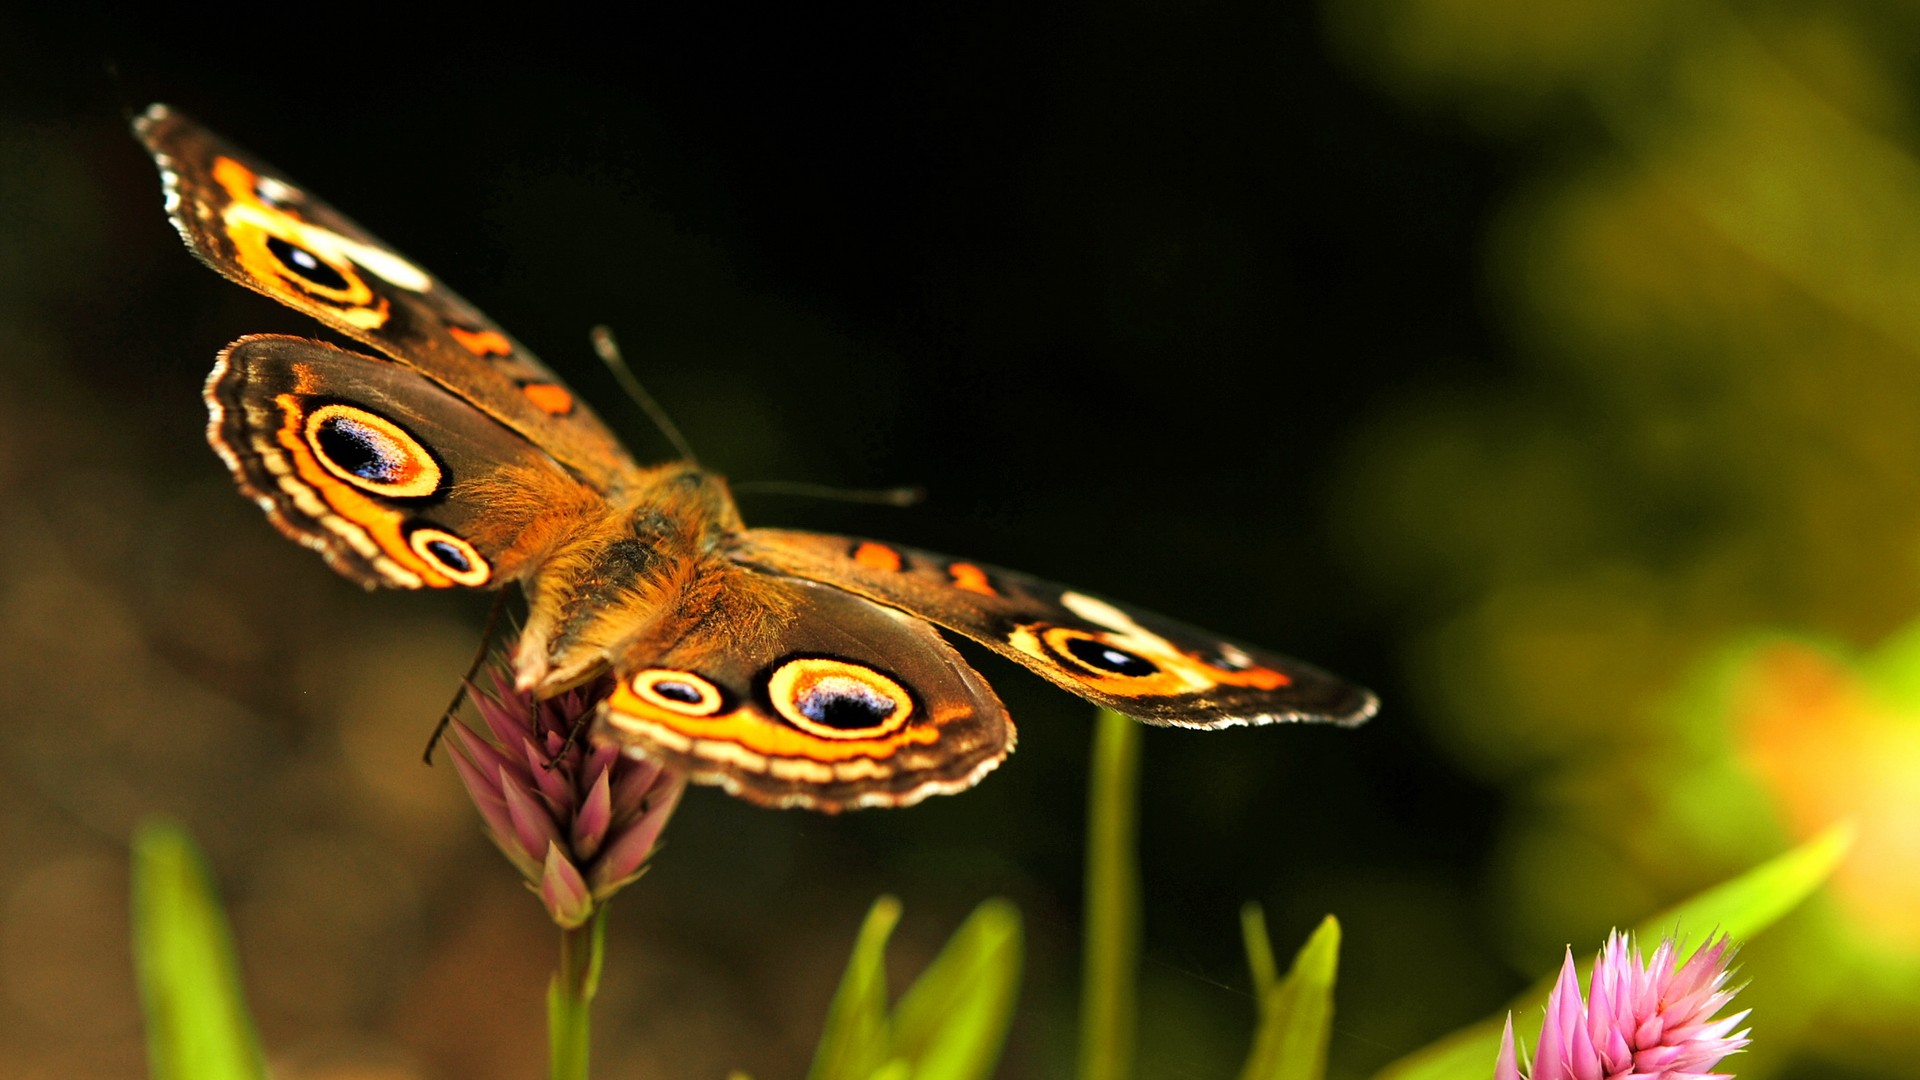 General 1920x1080 butterfly animals insect